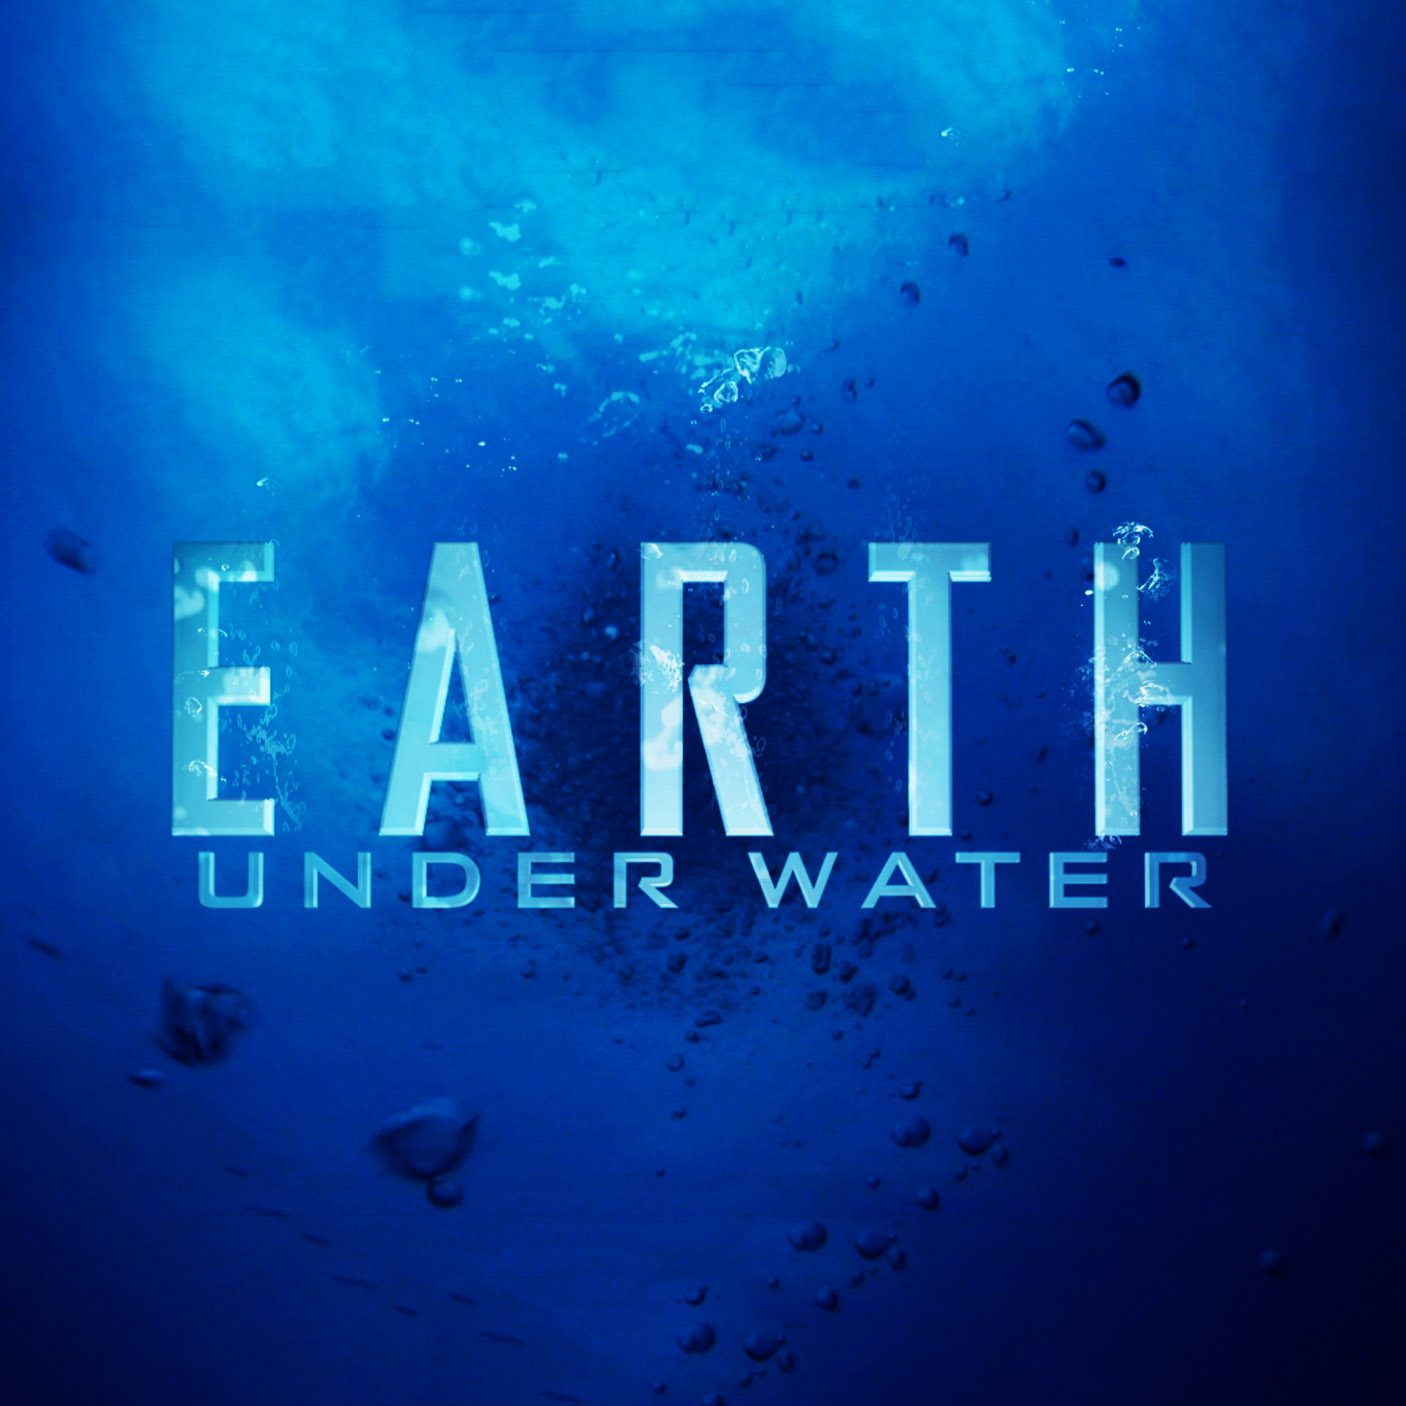 Logo branding and title screen for Nat Geo Channel's show, Earth Under Water.